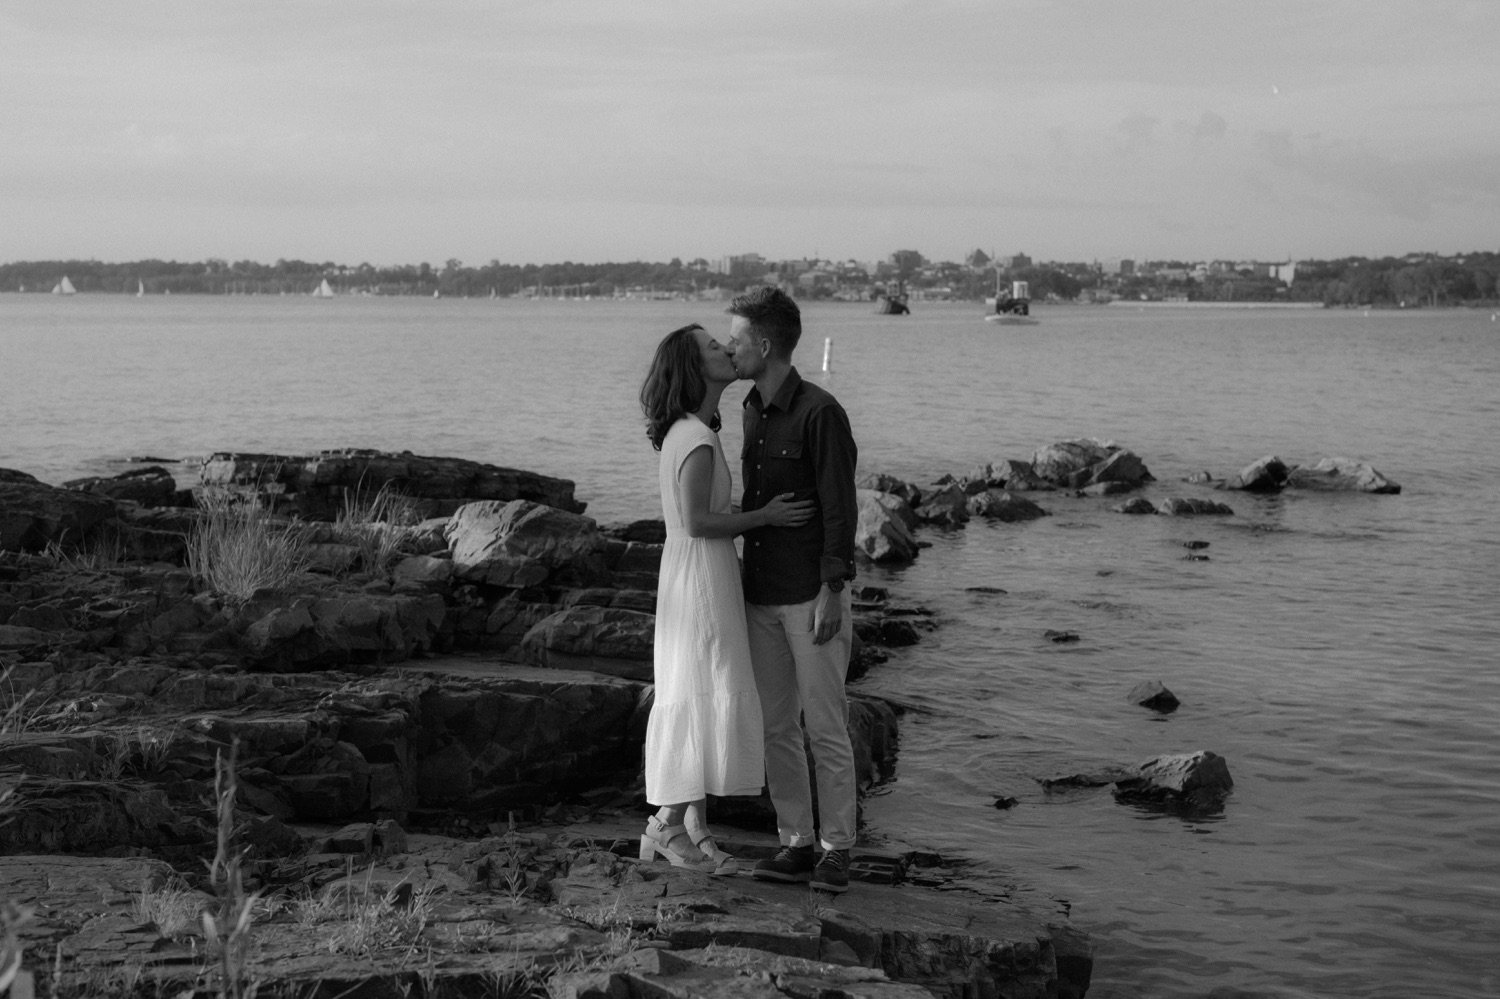 19_young couple kissing at lake champlain waterfront oakledge beach vermont .jpg